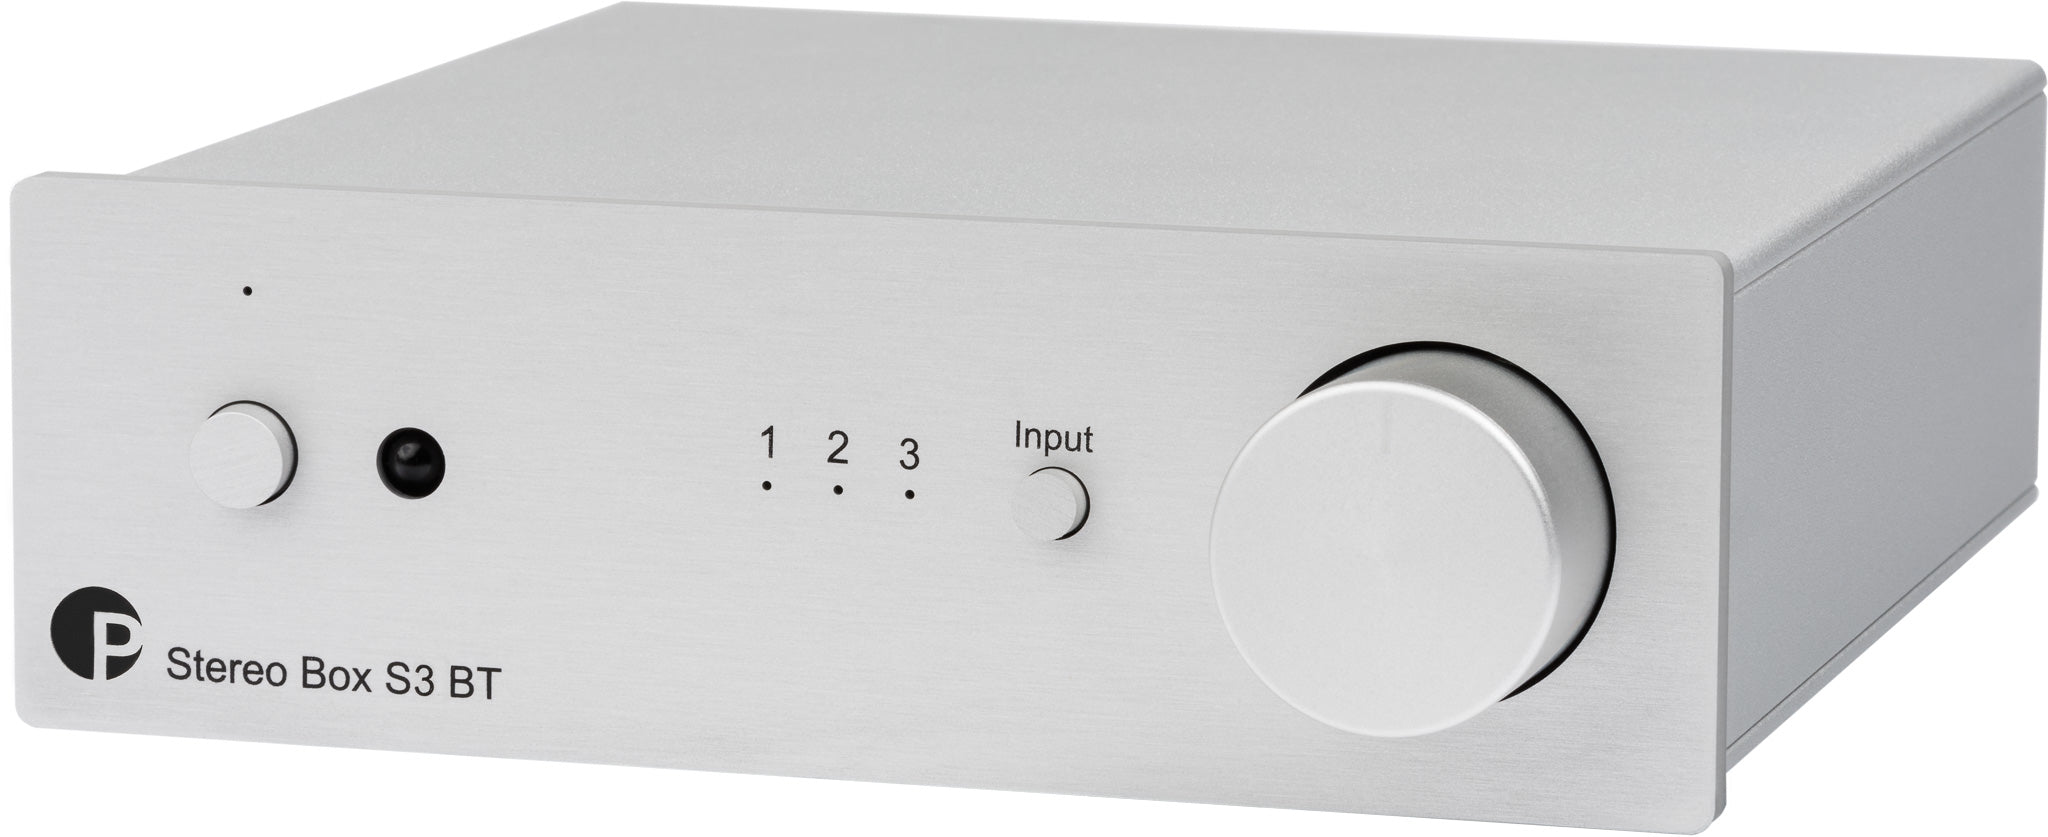 Pro-Ject Stereo Box S3 BT amplifier